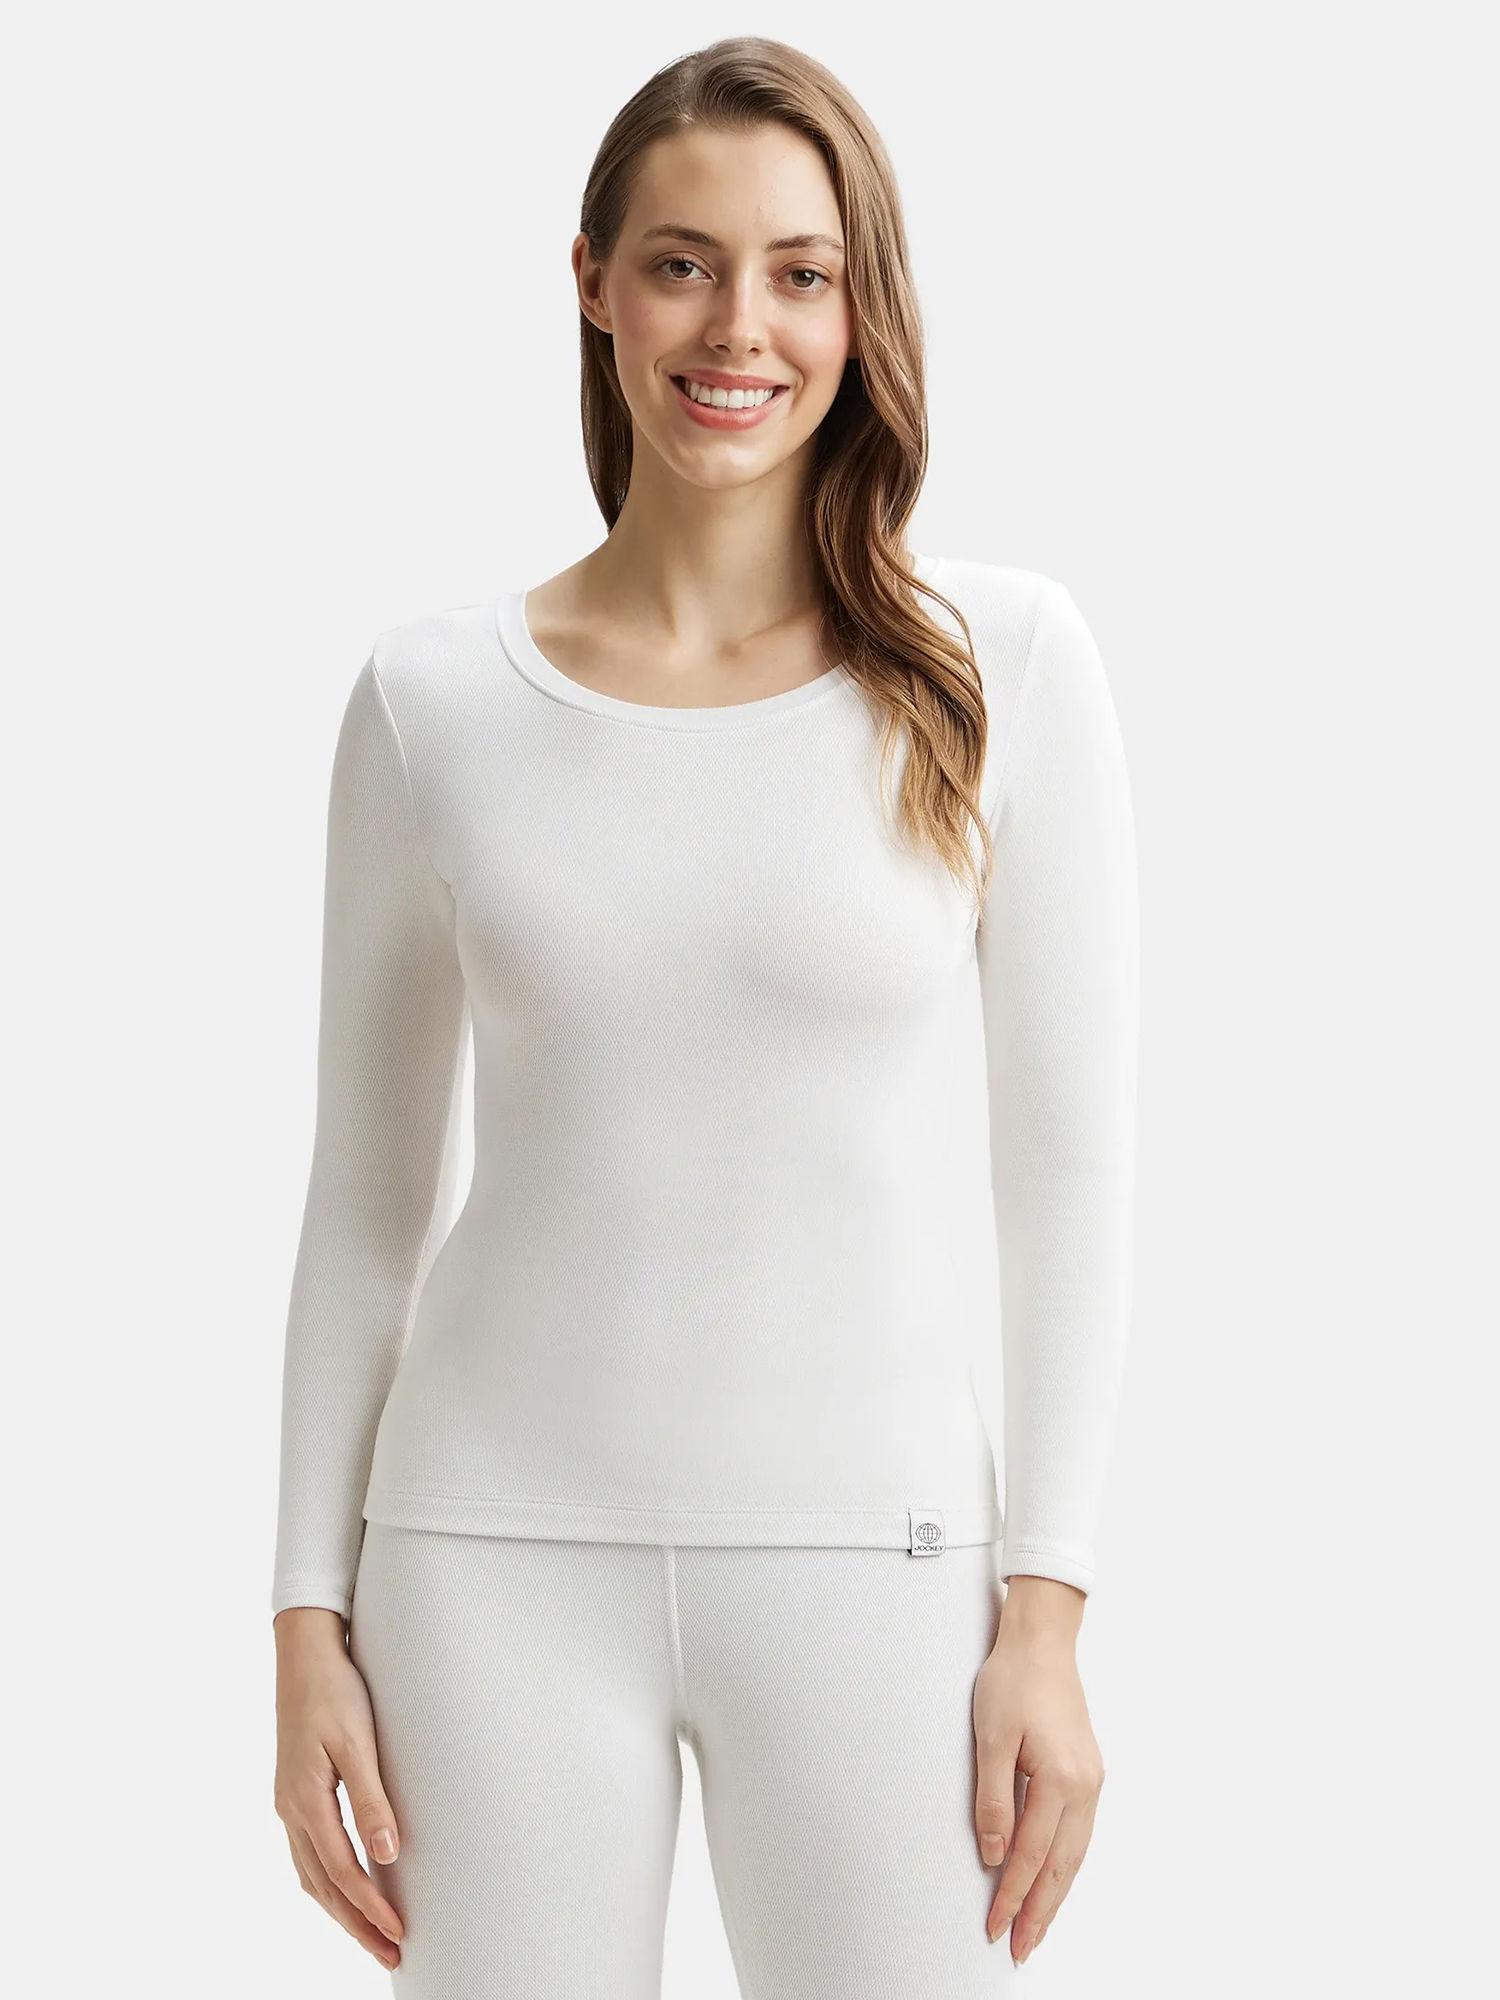 2540 women microfiber stretch fleece fabric thermal top with staywarm technology-white